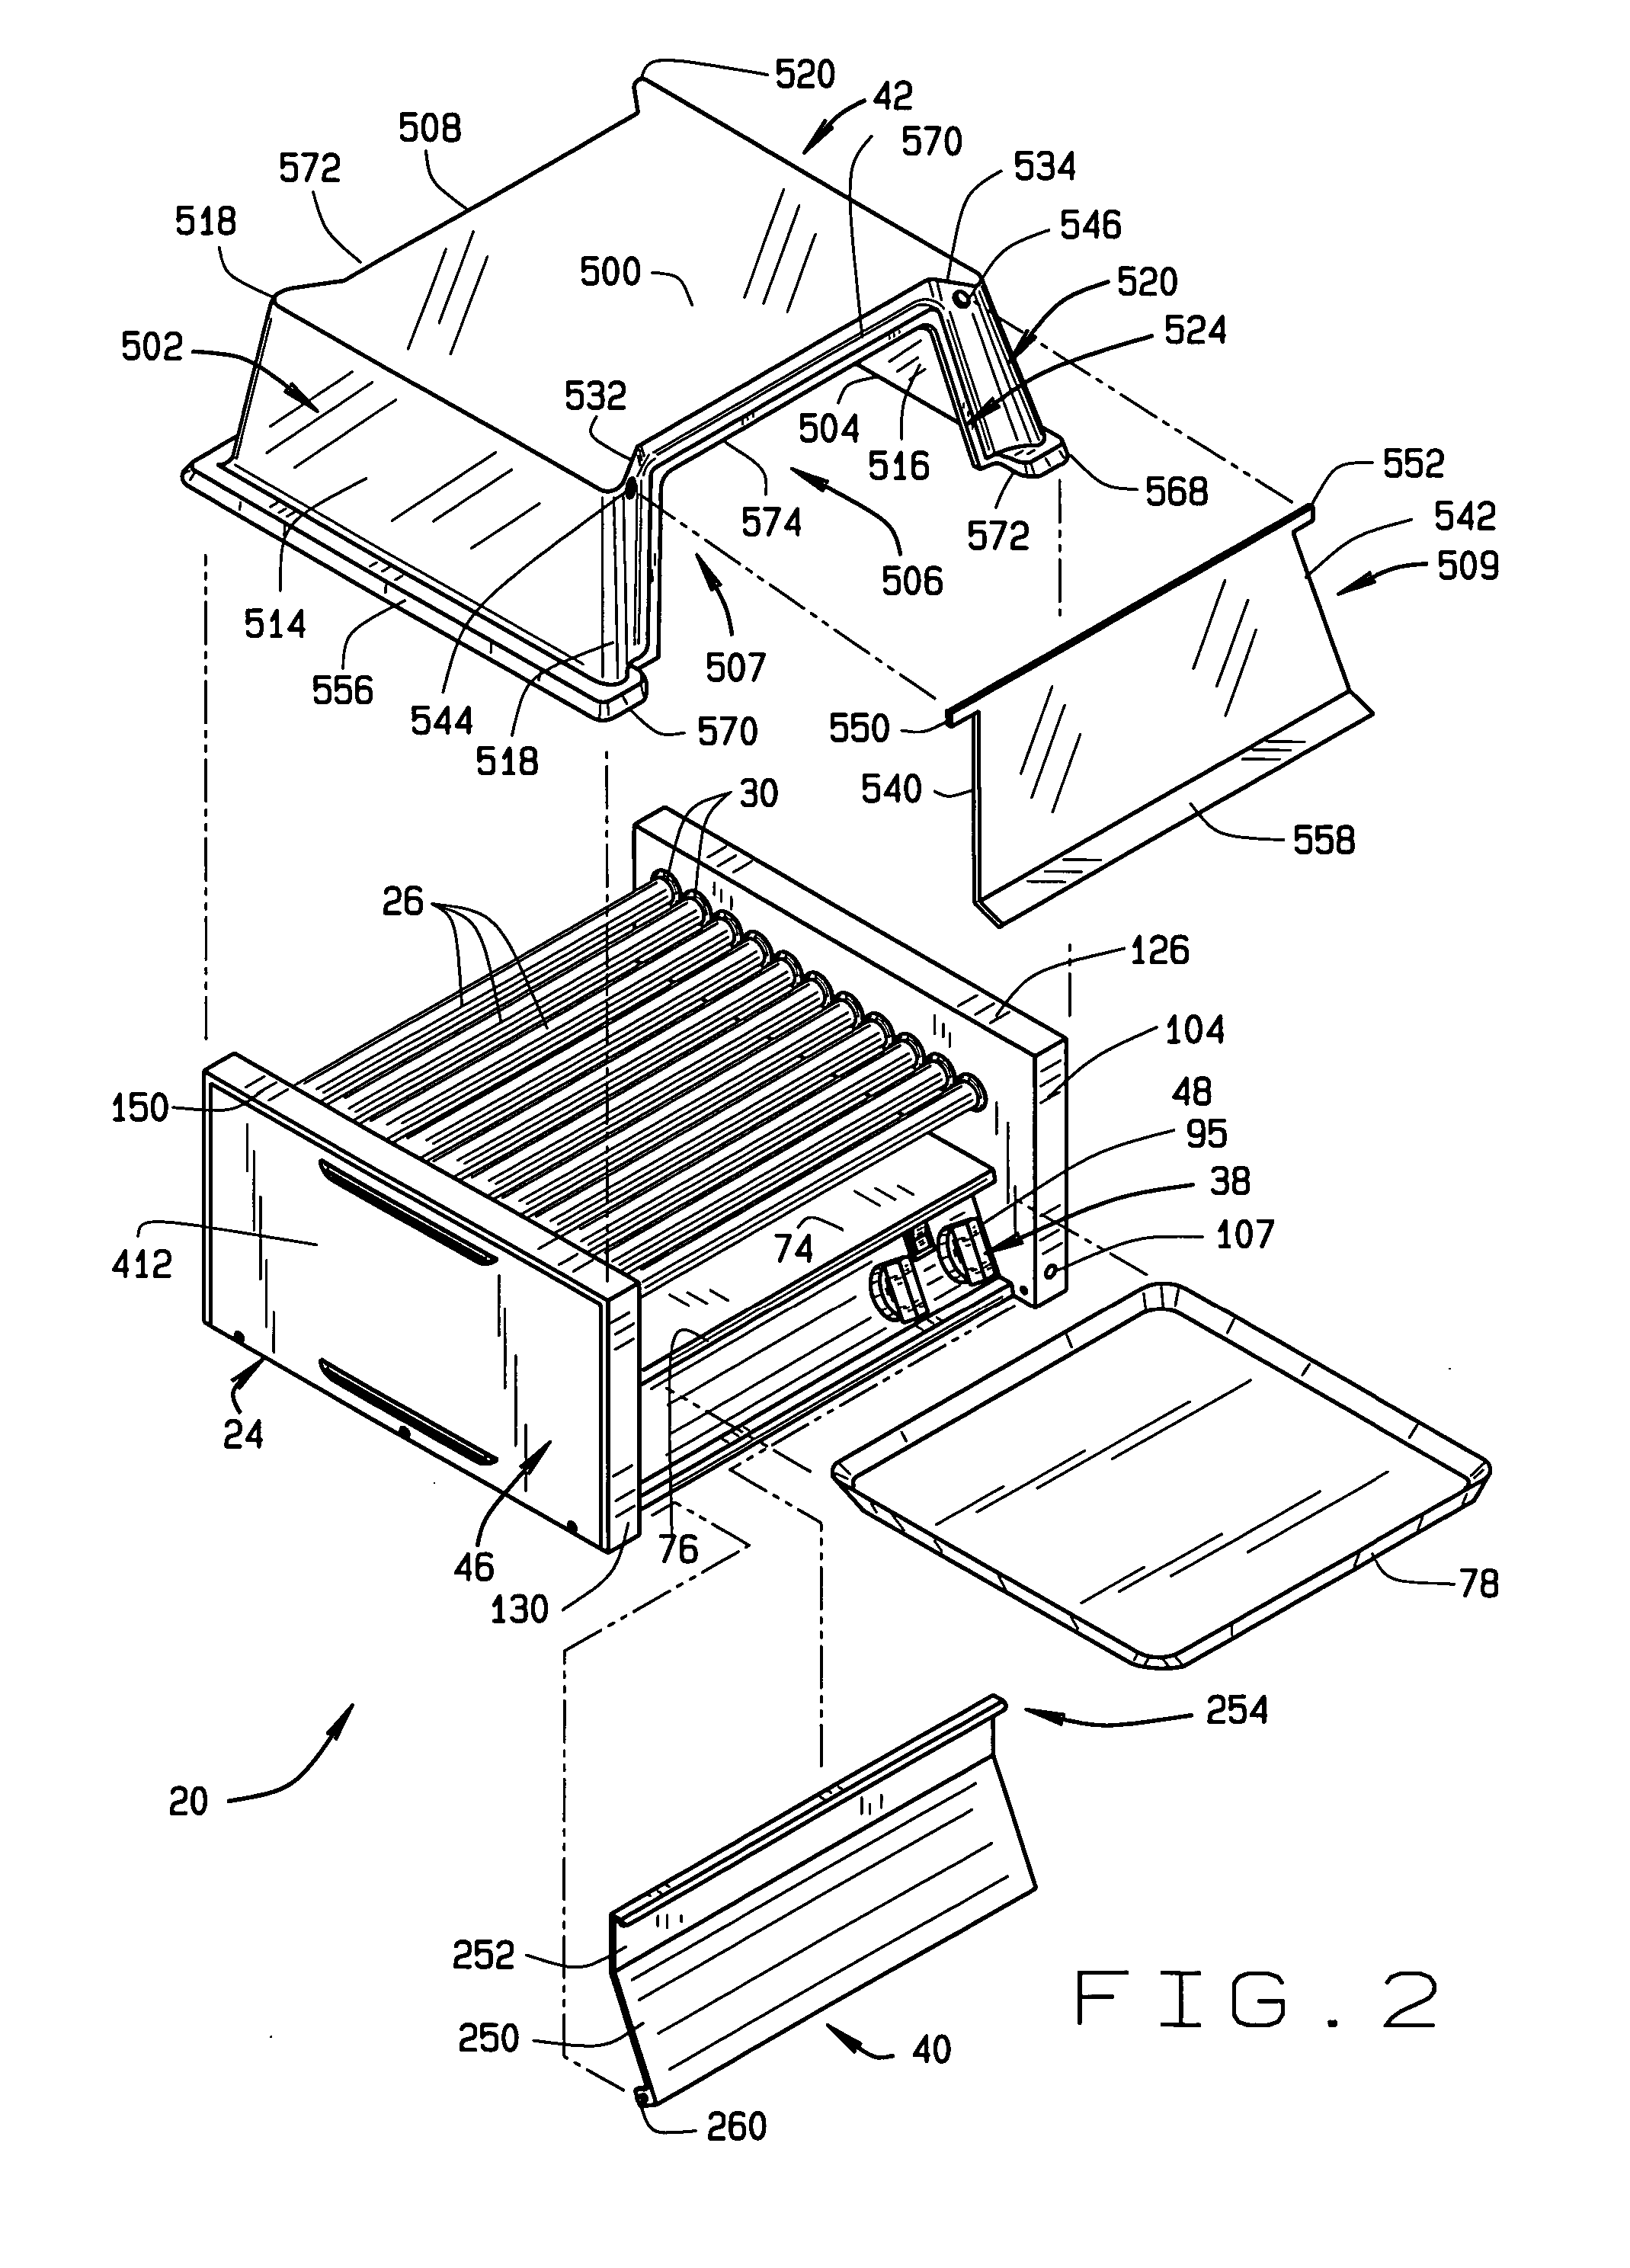 Roller grill assembly for cooking human food